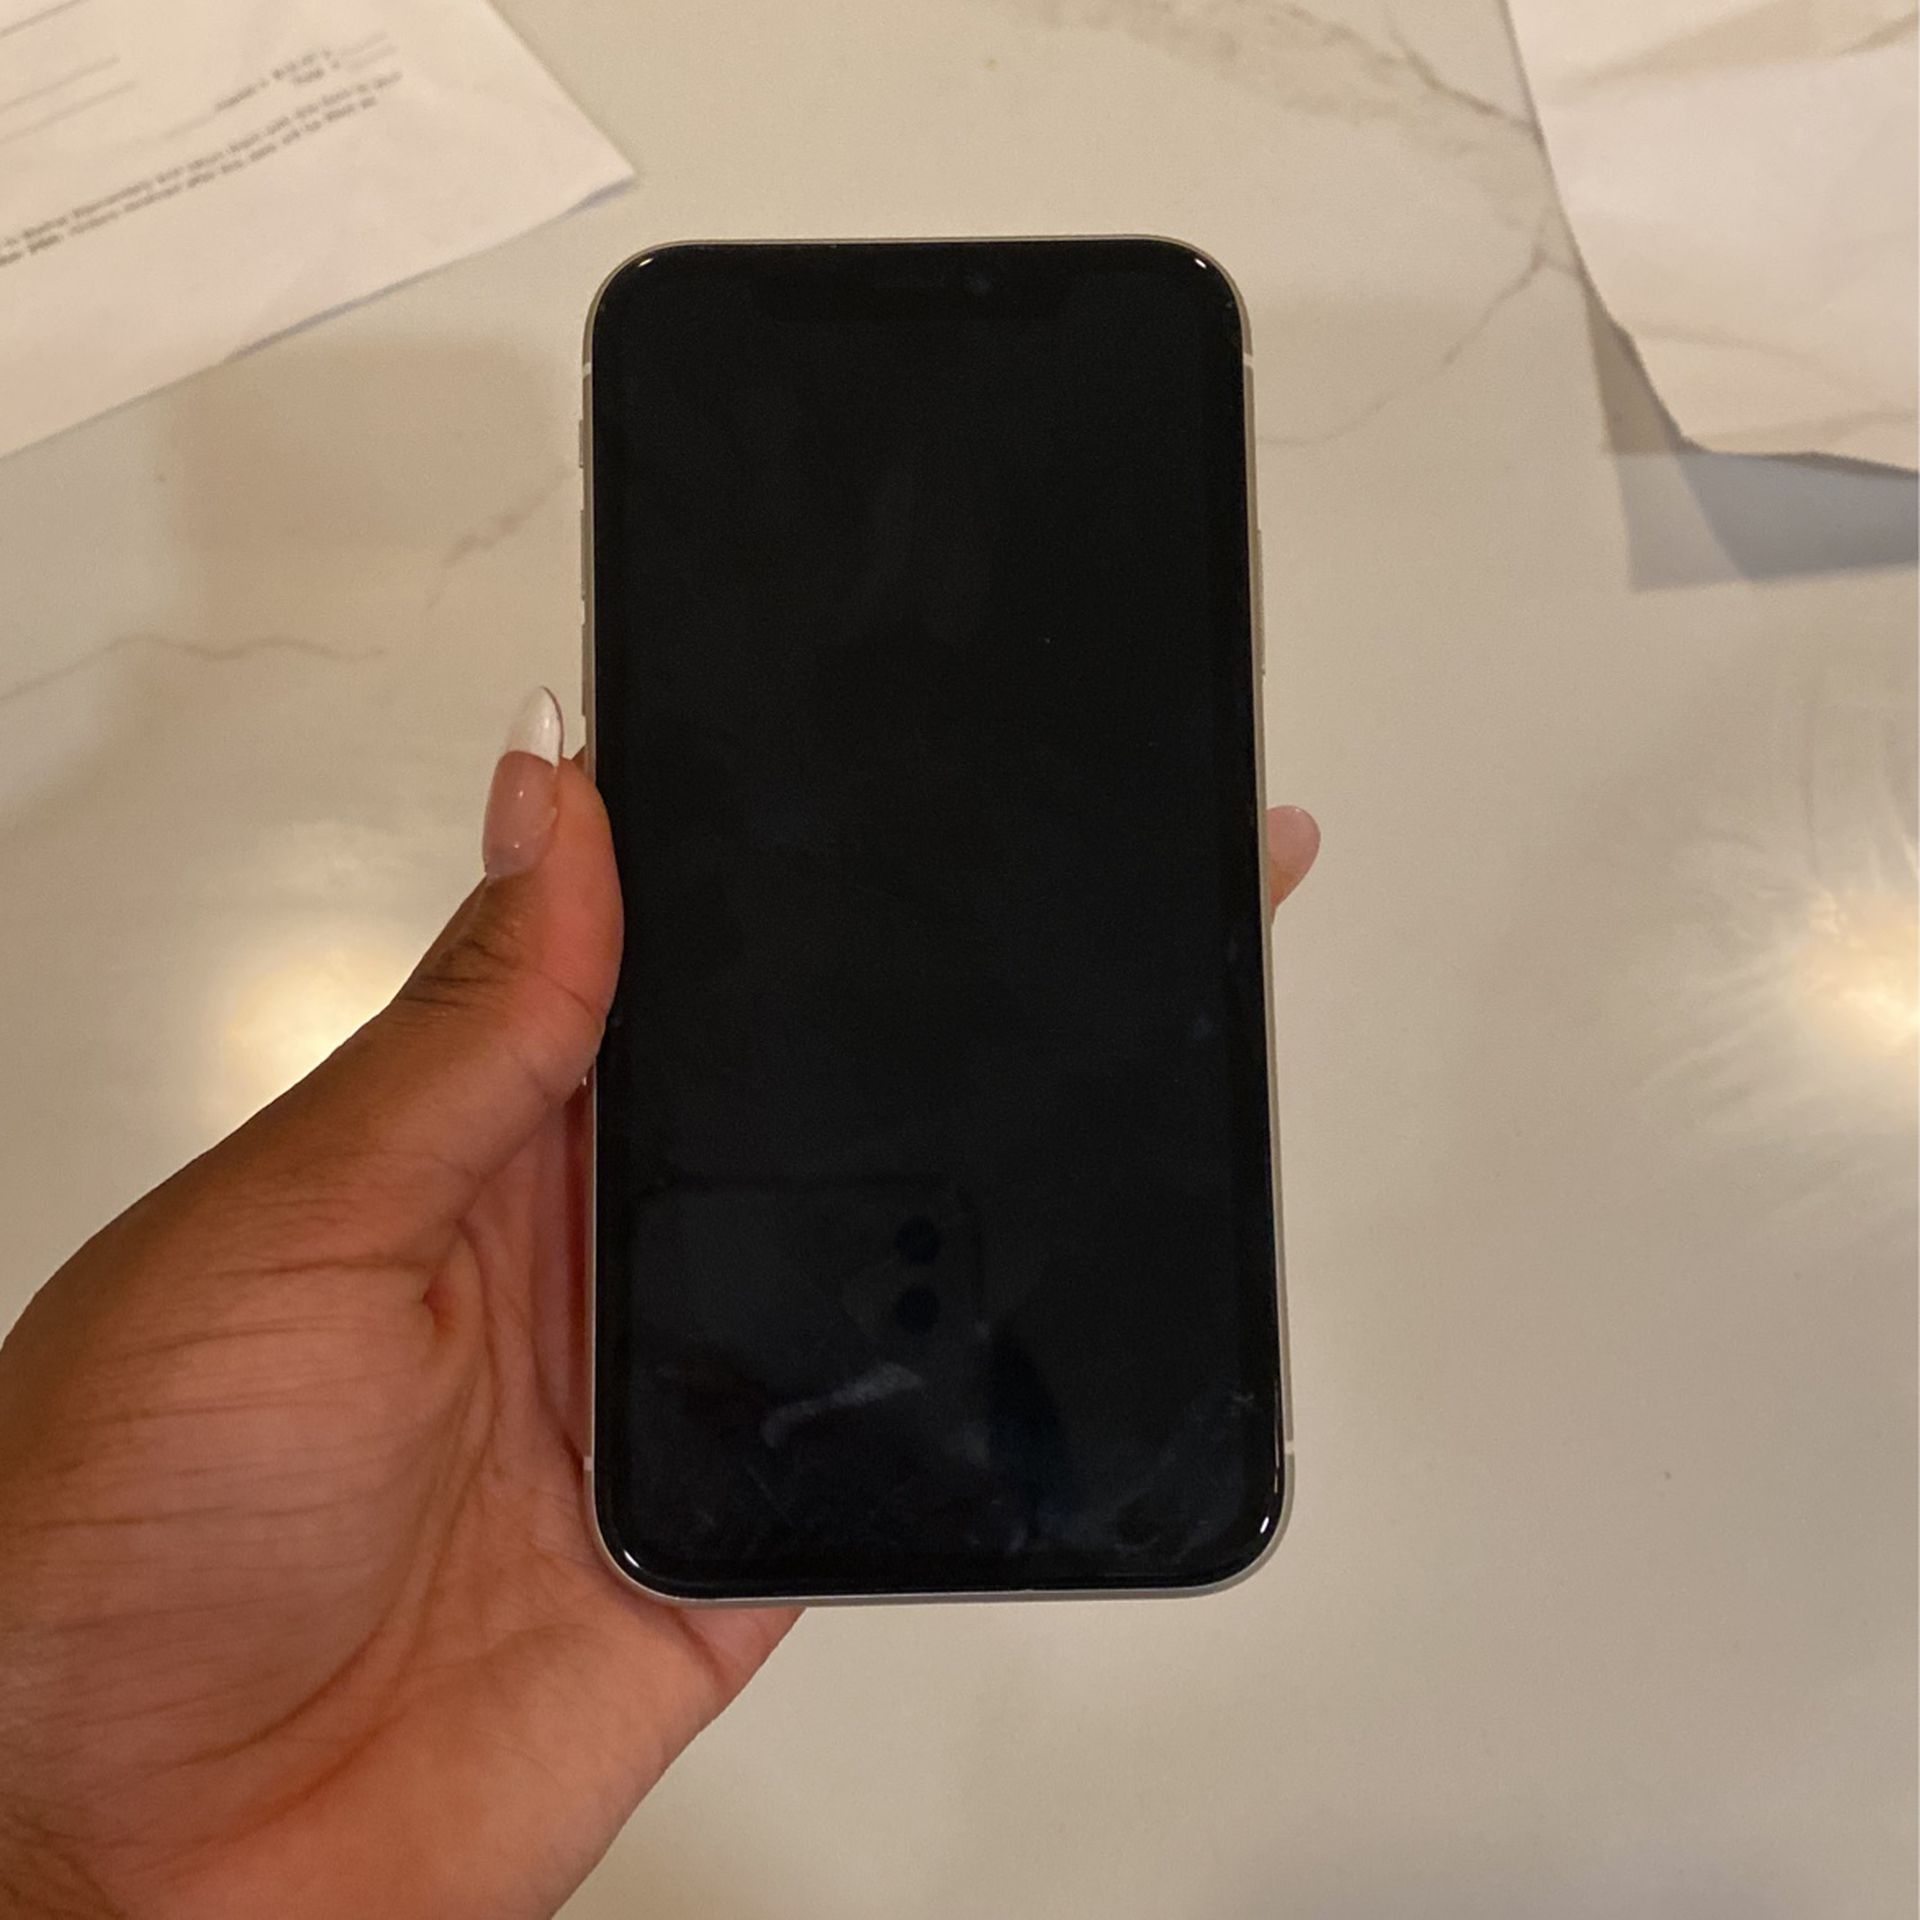 iPhone 11 For Sale